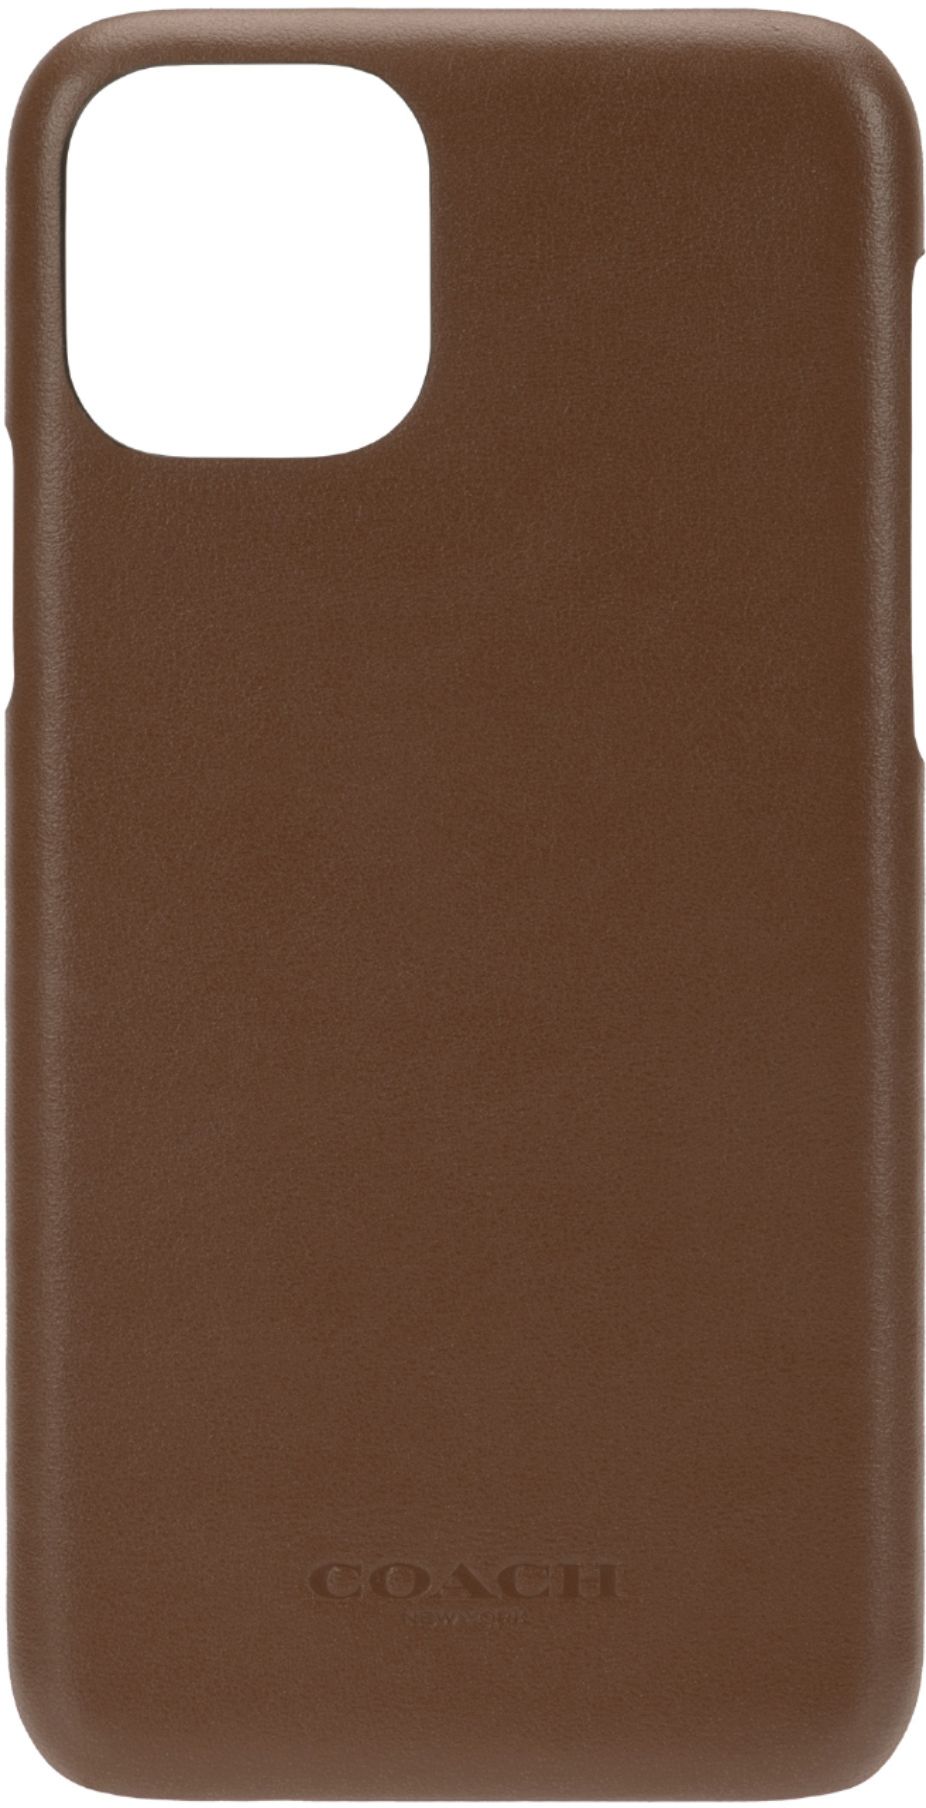  DAIZAG Case Compatible with iPhone 12 Mini,B Brown